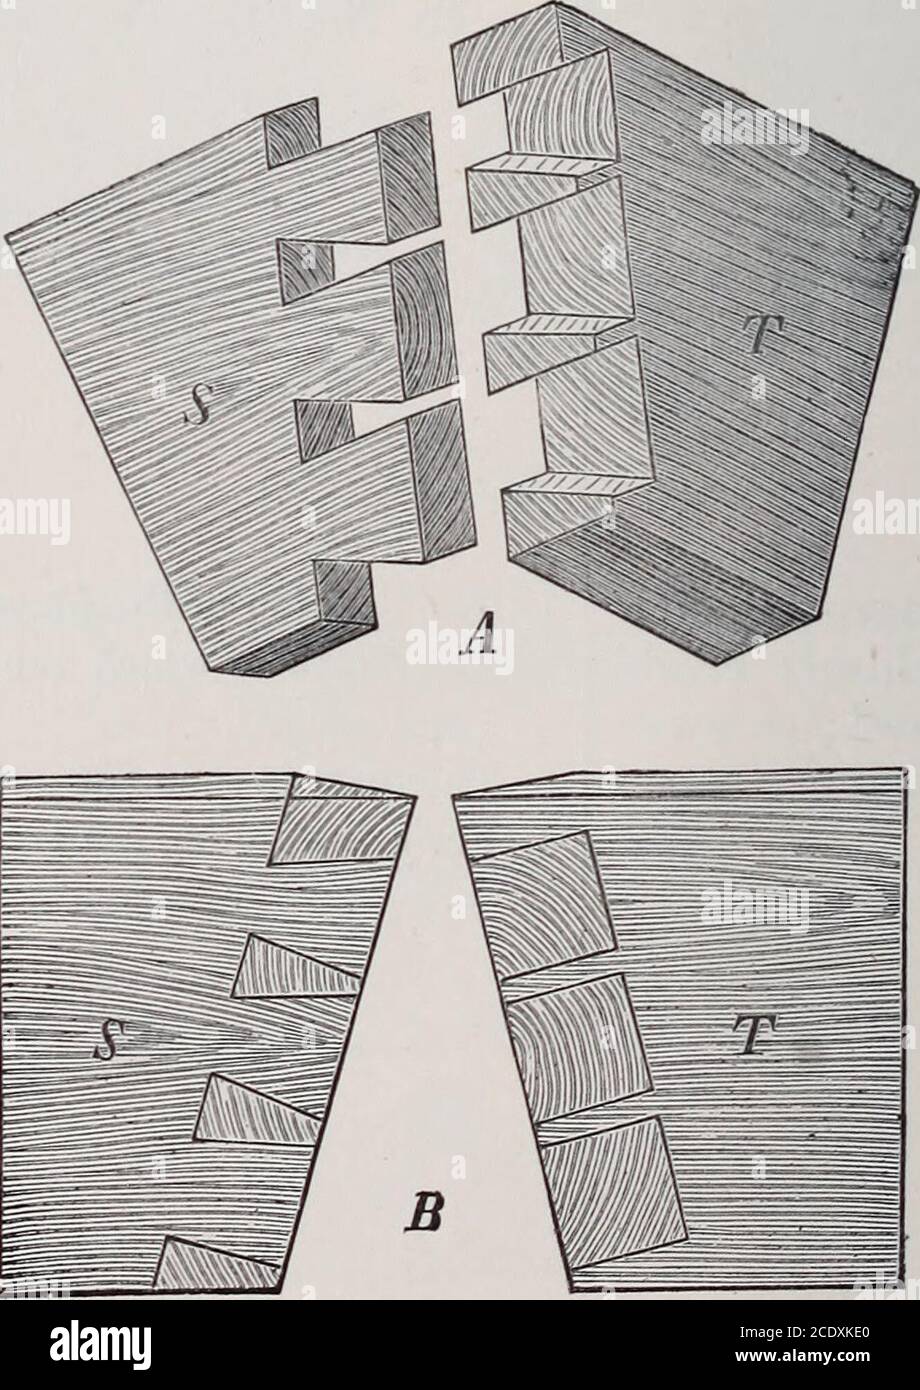 . Teacher's handbook of Slöjd . Lock-fitting. 79 Oblique dove-tailing. To make a rectangular end-joint withoblique pieces of wood.. Fig. 118. 175 Tools required. Directions for Work. Pin-bit; firmerchisel; knife:bradawl;screwdriver;compass-saw. Bevel; dove-tailsaw; com-pass; square;tenon-saw;firmer chisel;smoothing-plane. 1. The position of the lock is decided on. 2. The place is cut out with the pin-bit and the firmer chisel to a depth which permits the metal plate to lie on thesame plane as the wood. 3. The hole for the key is cut out with the centre-bit, knife, and chisel. (In larger work w Stock Photo